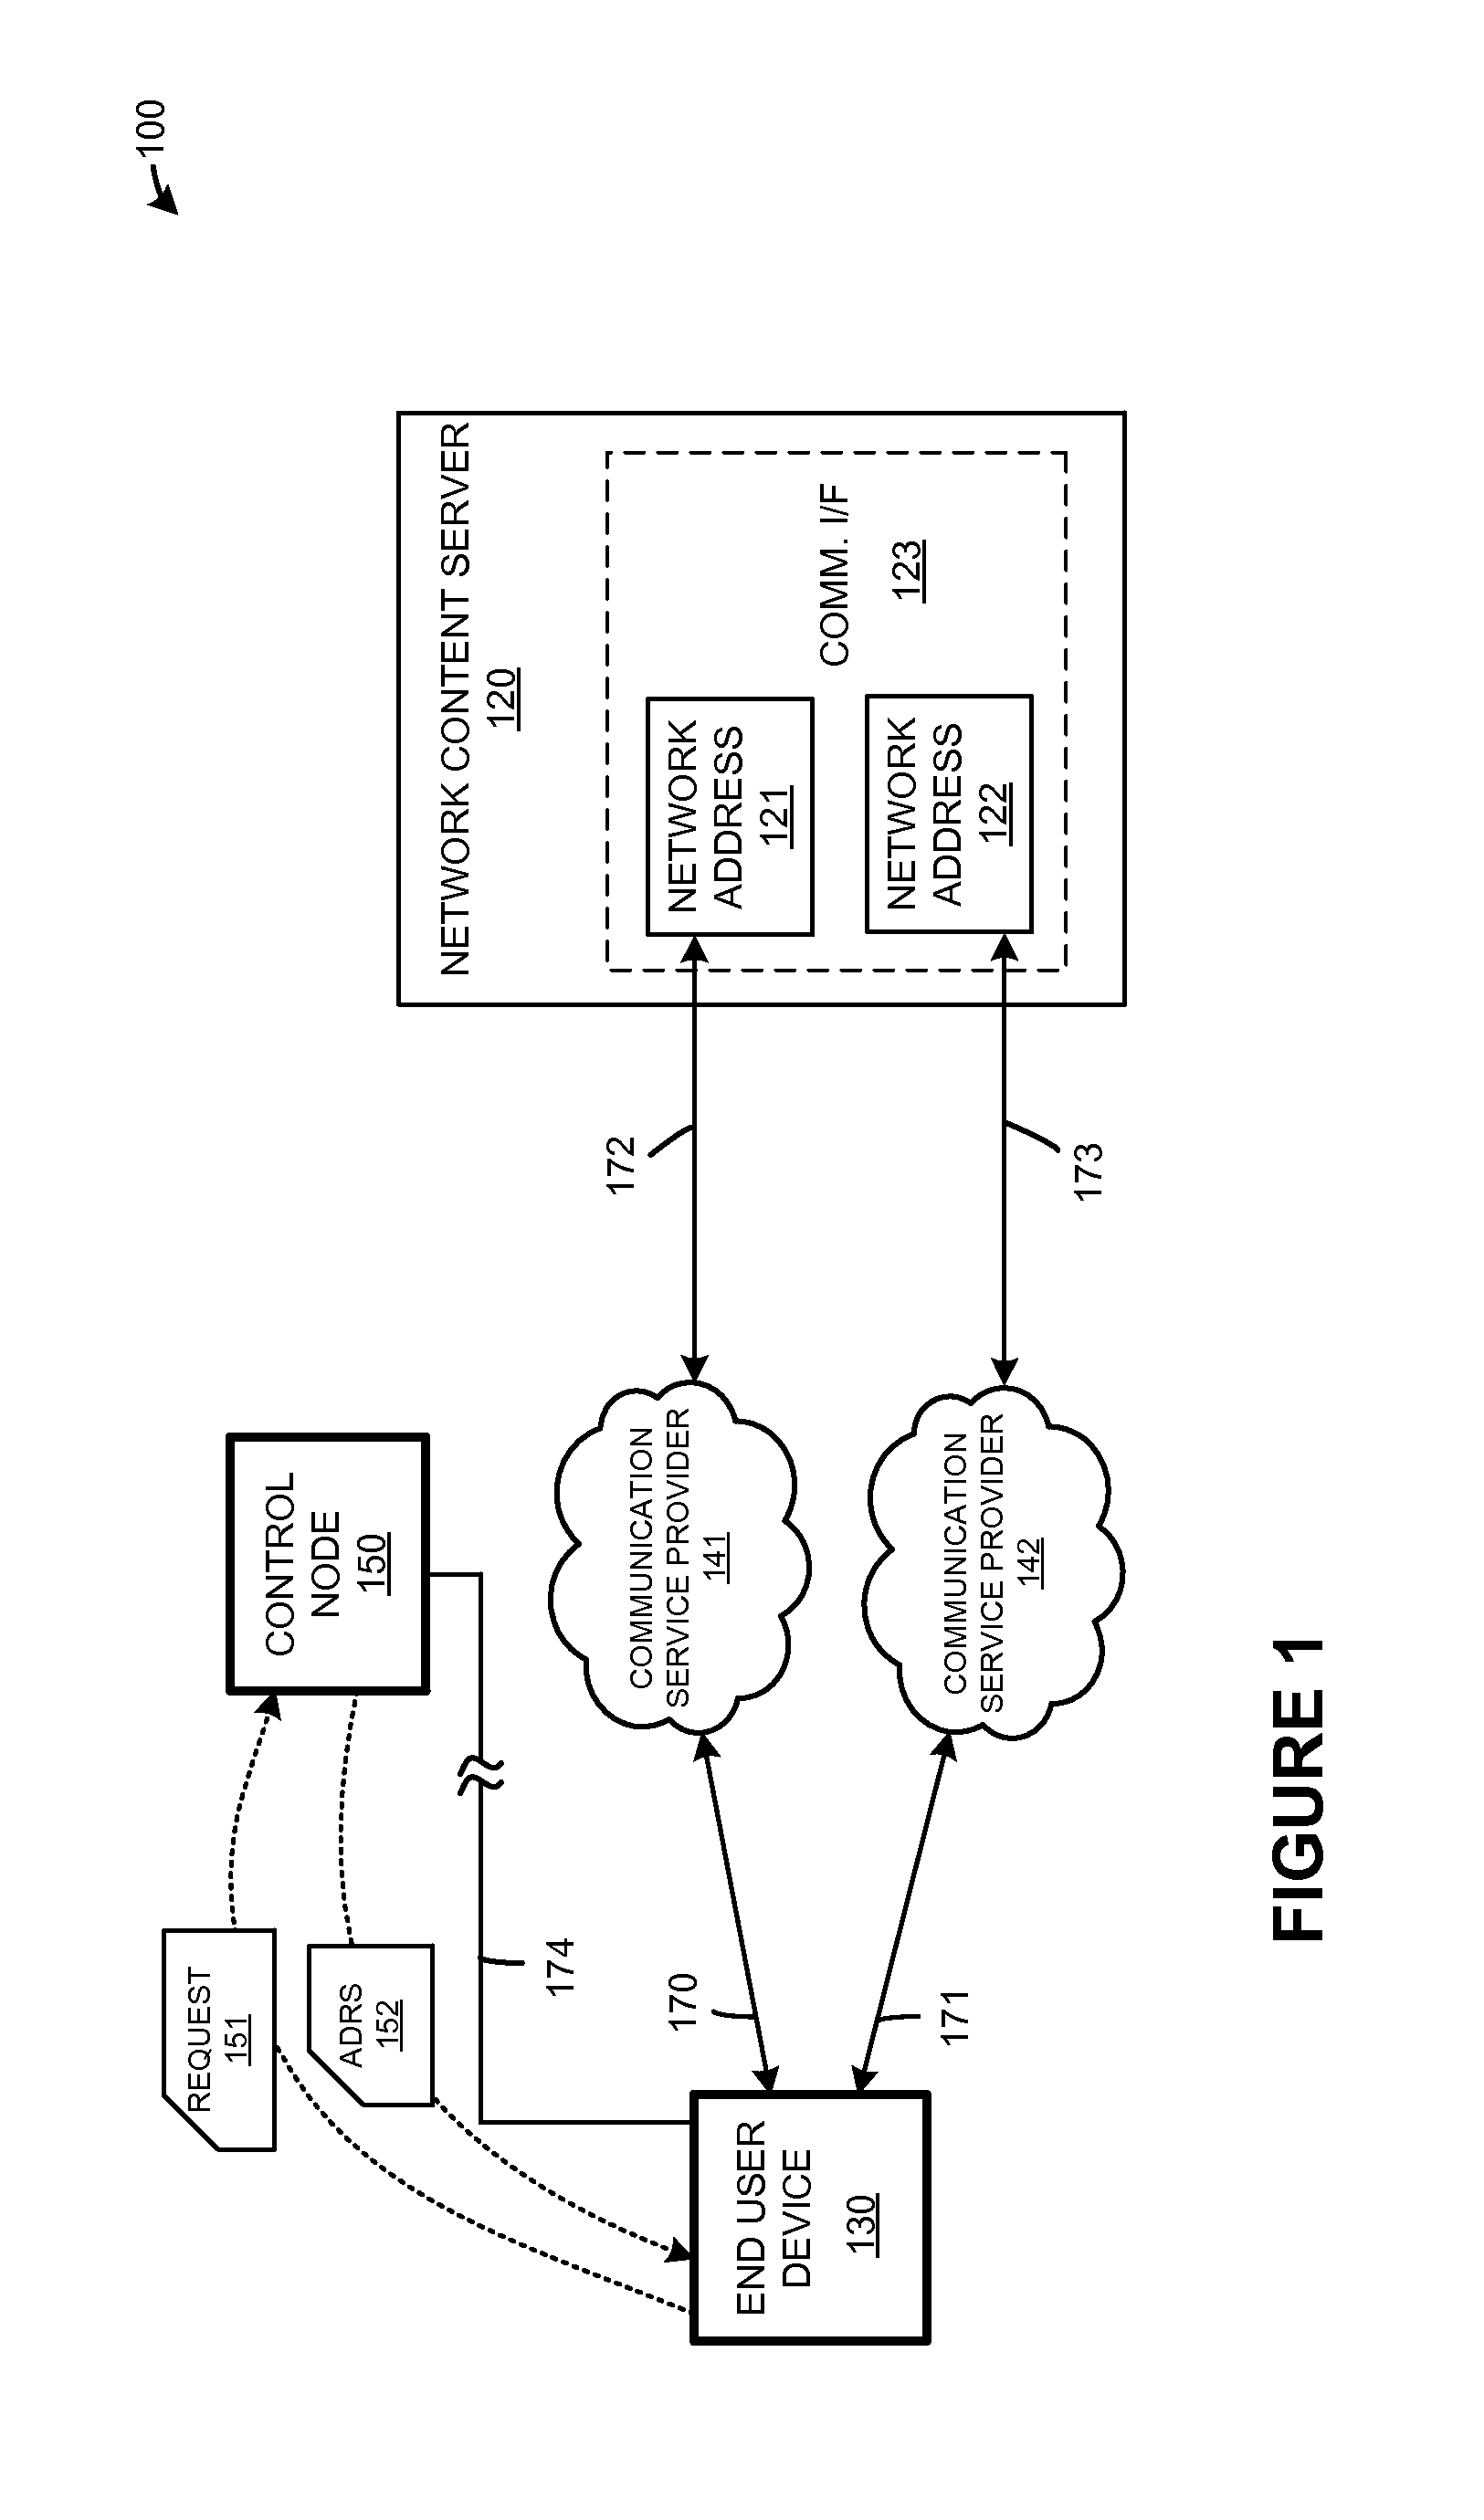 Server network address selection based on network characteristics of service providers